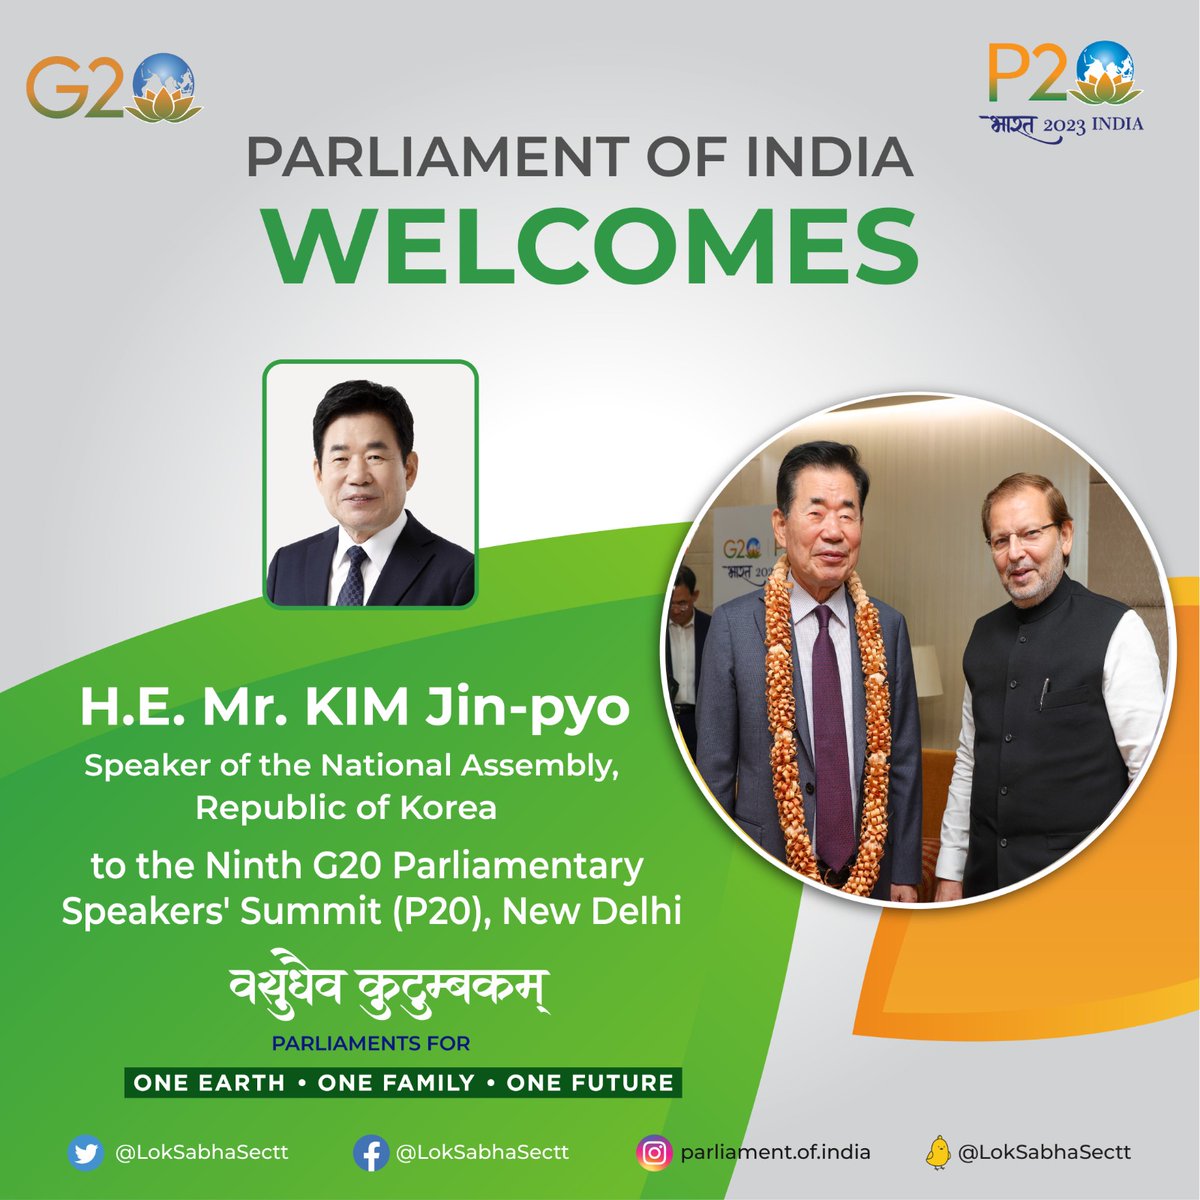 Parliament of India is honoured to welcome H.E. Mr. Kim Jin-pyo, Speaker of the National Assembly, Republic of Korea to the #P20Summit. #P20Bharat 

#P20 Conference @PIB_India @PIBHindi @DD_Bharati @DDNewslive @airnewsalerts @AIRNewsHindi @IPUparliament @g20org @G20BHARAT